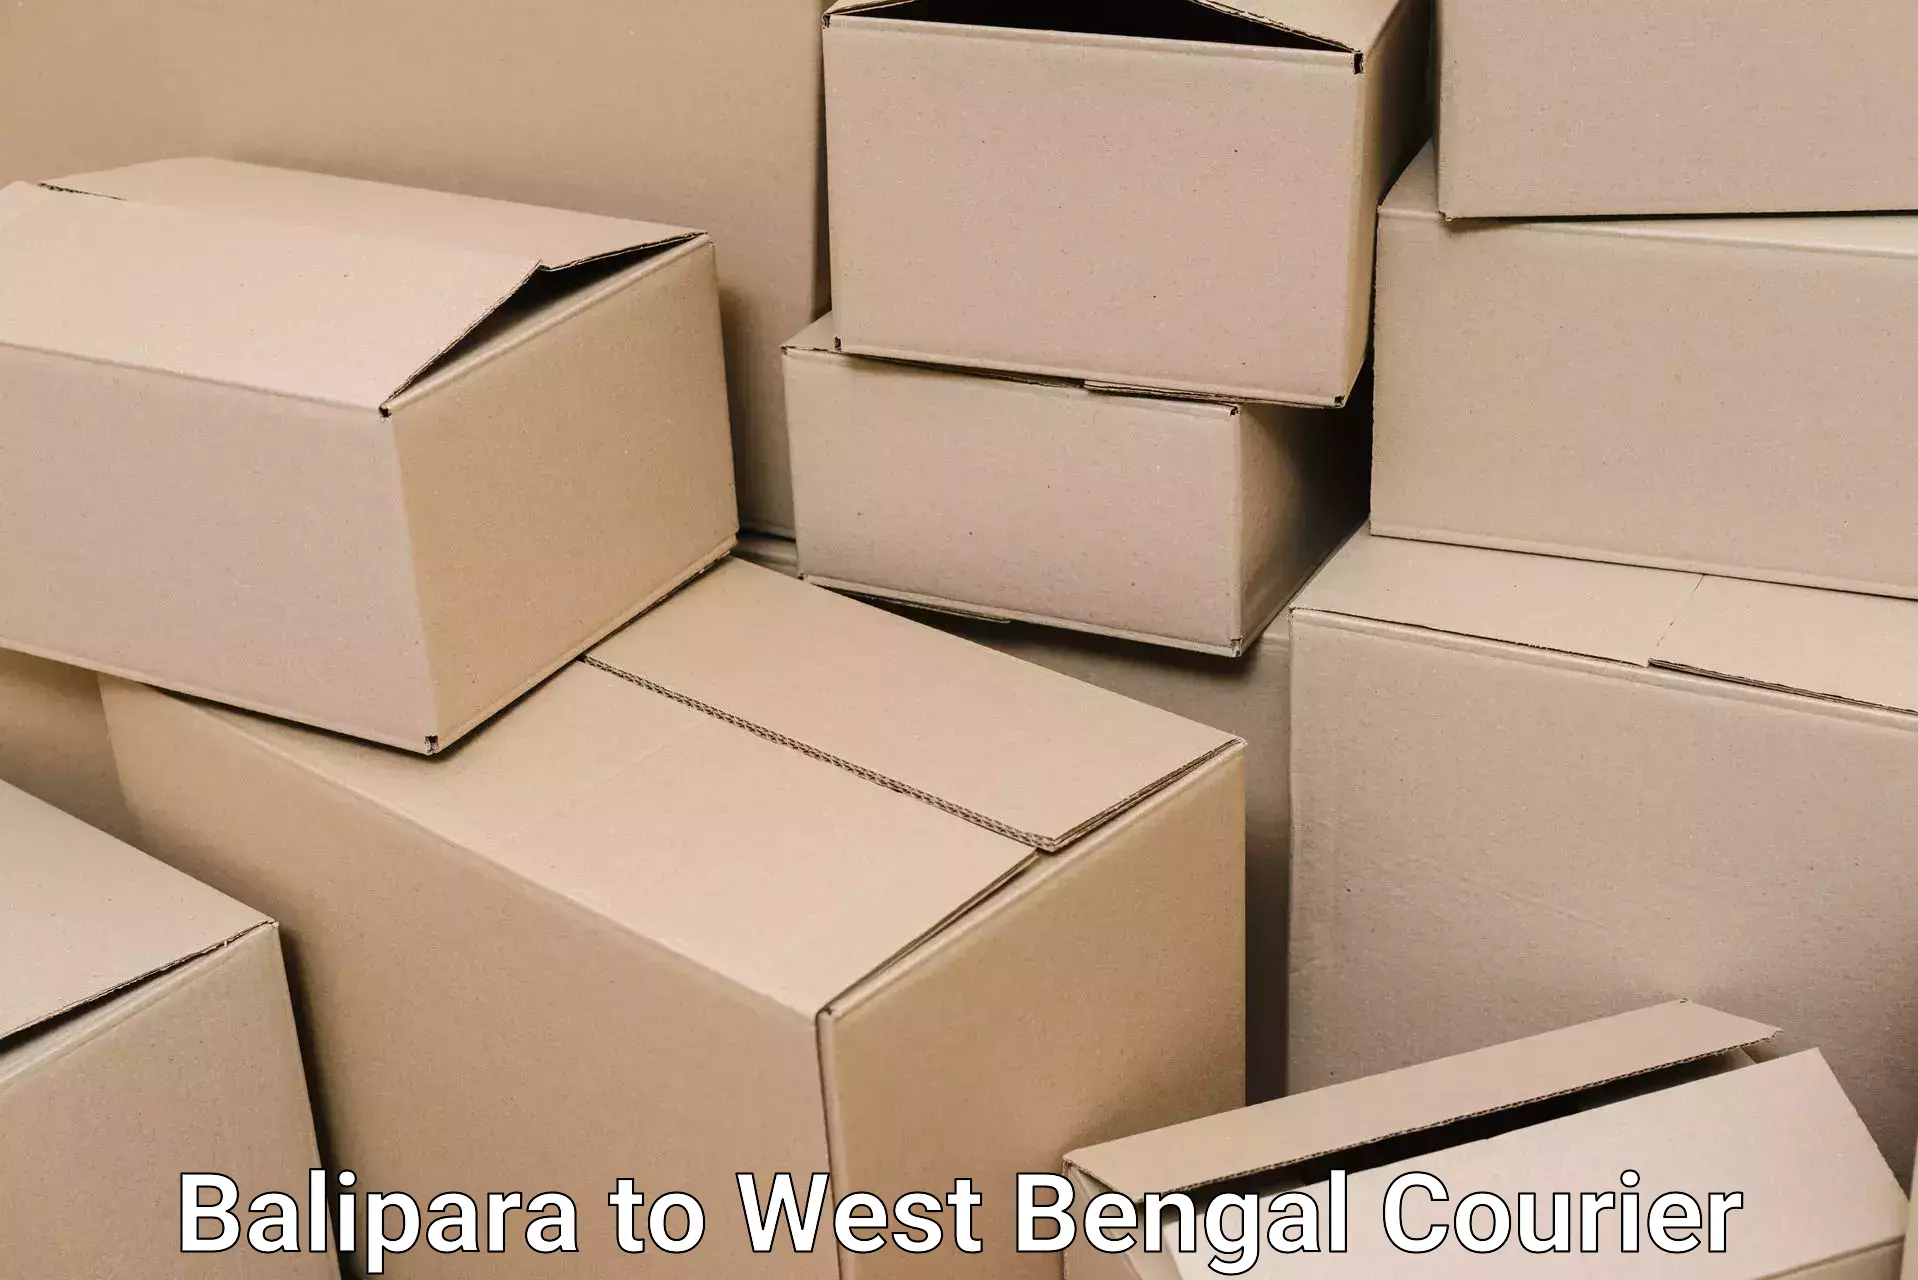 Full-service household moving in Balipara to West Bengal